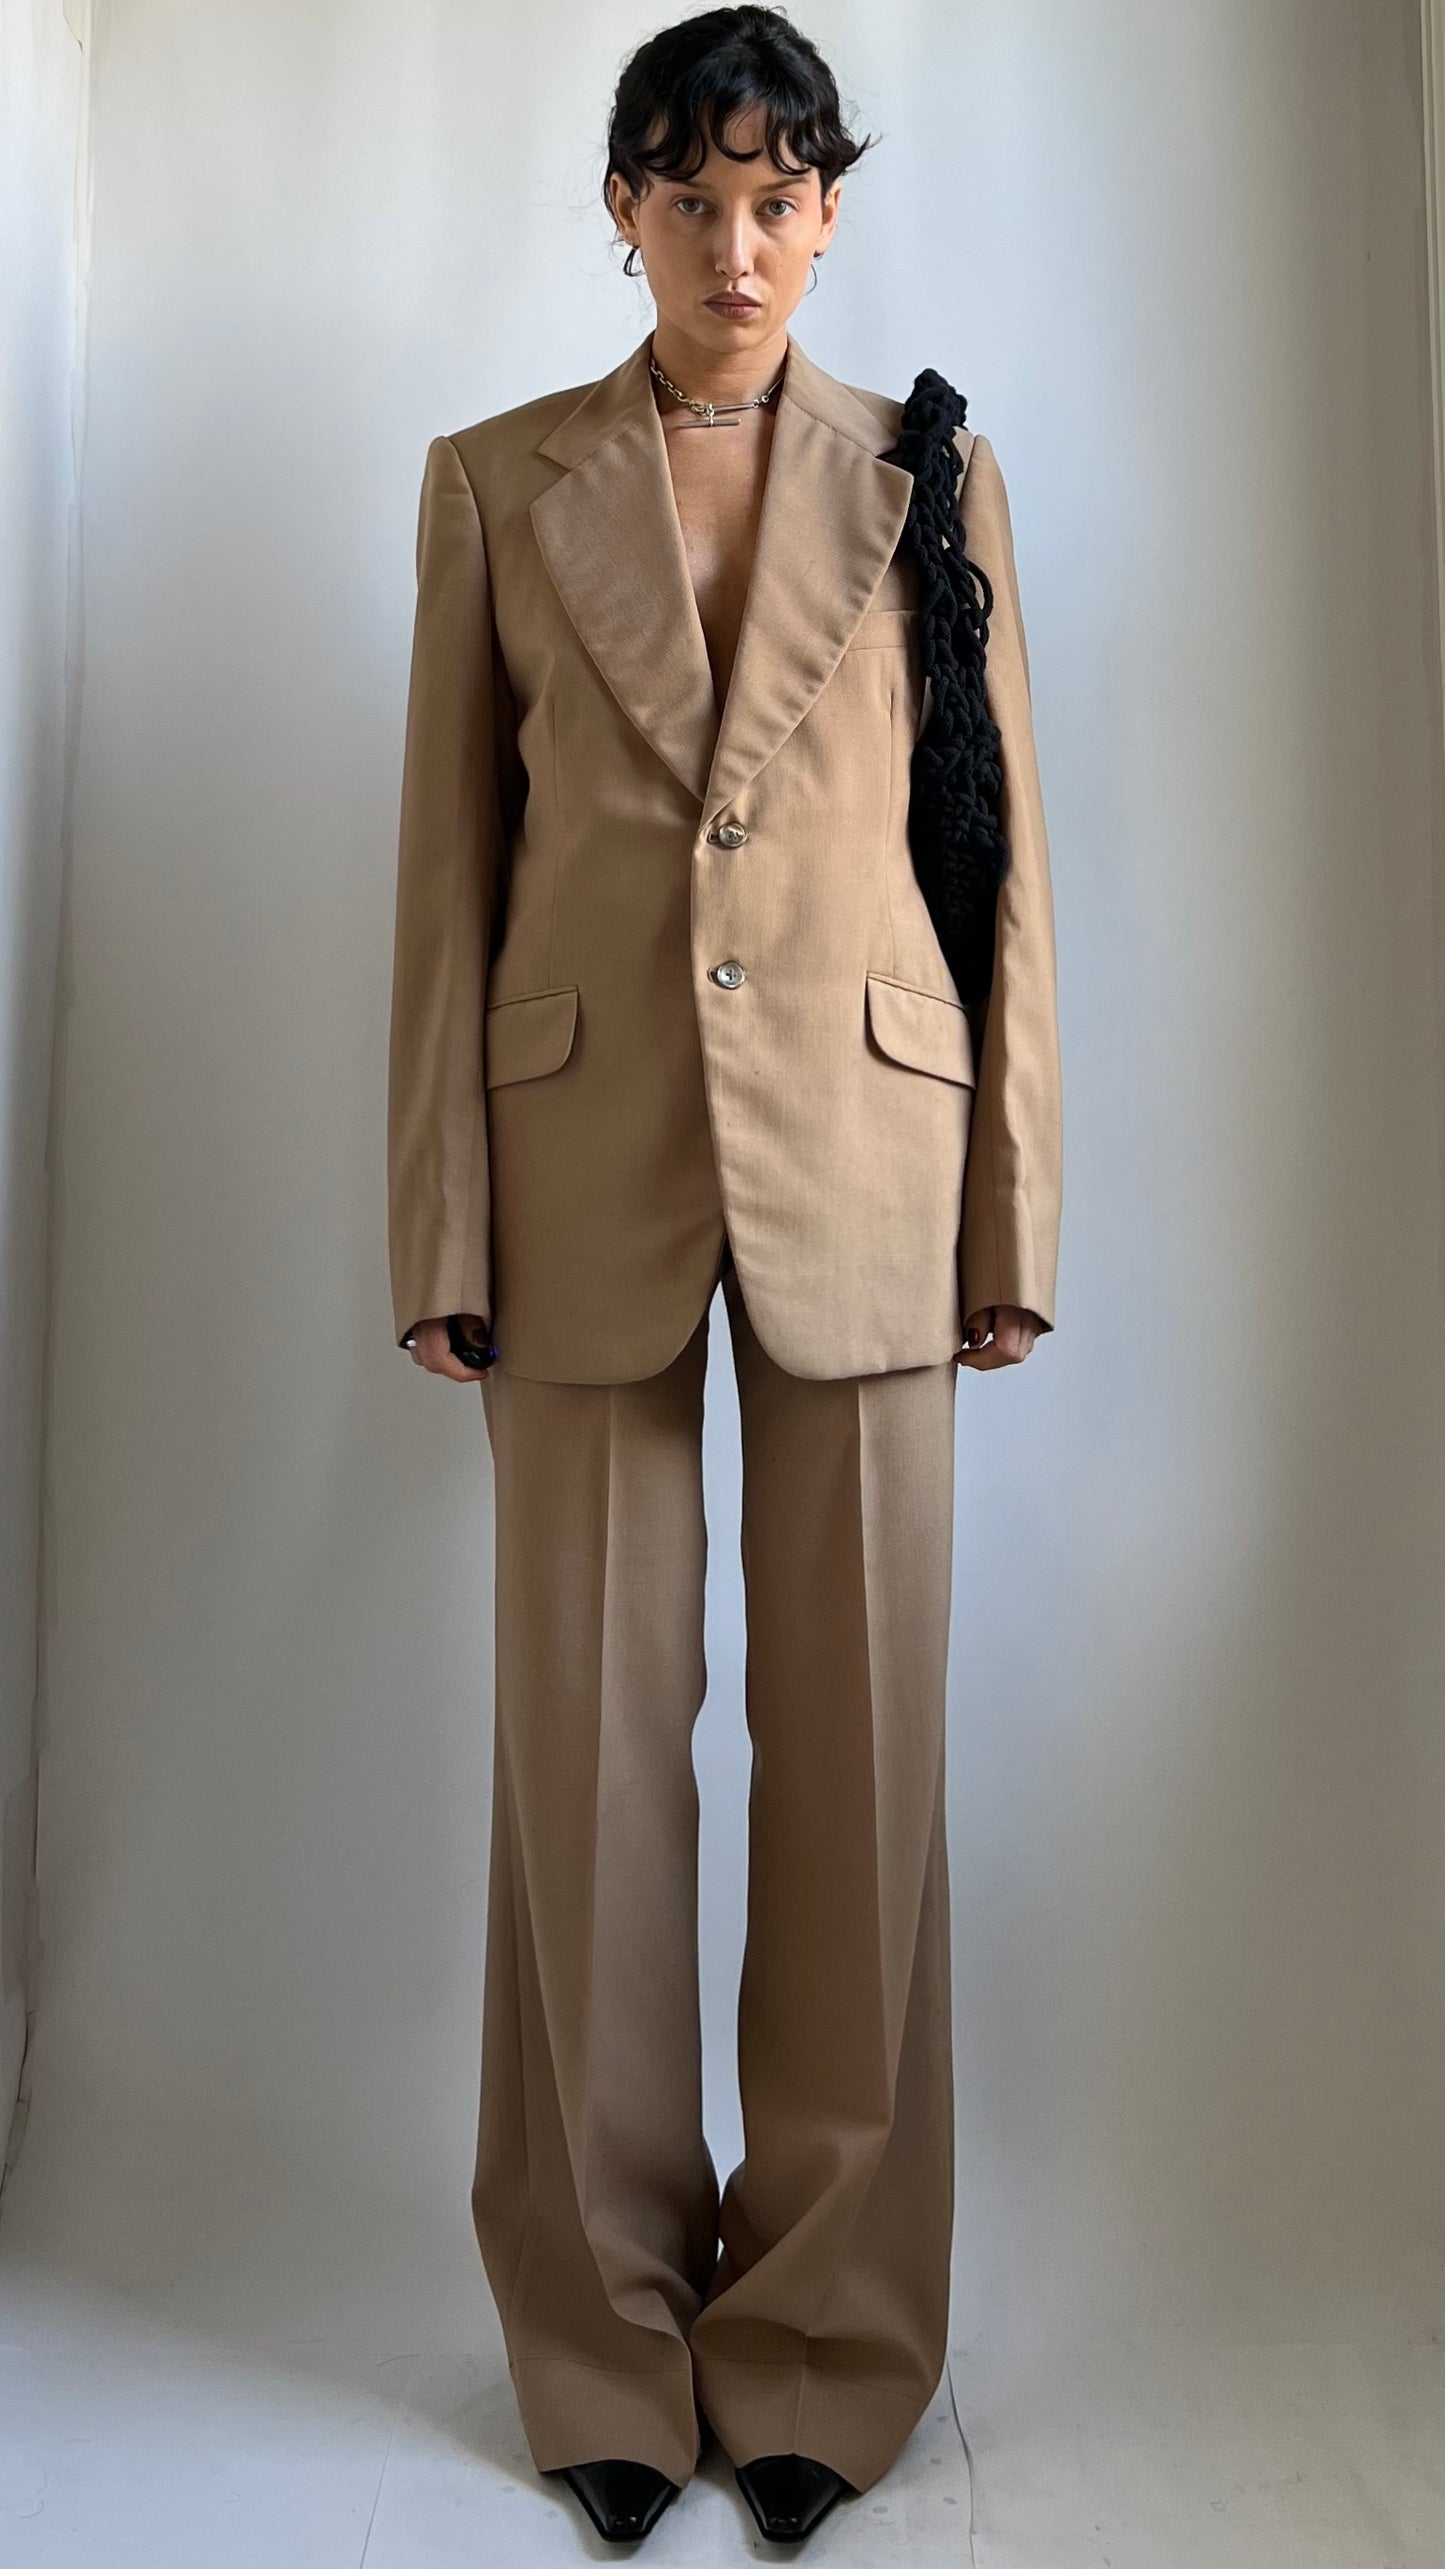 70S CANVASSED BESPOKE SUIT WITH SATIN LINING / W 27.5"